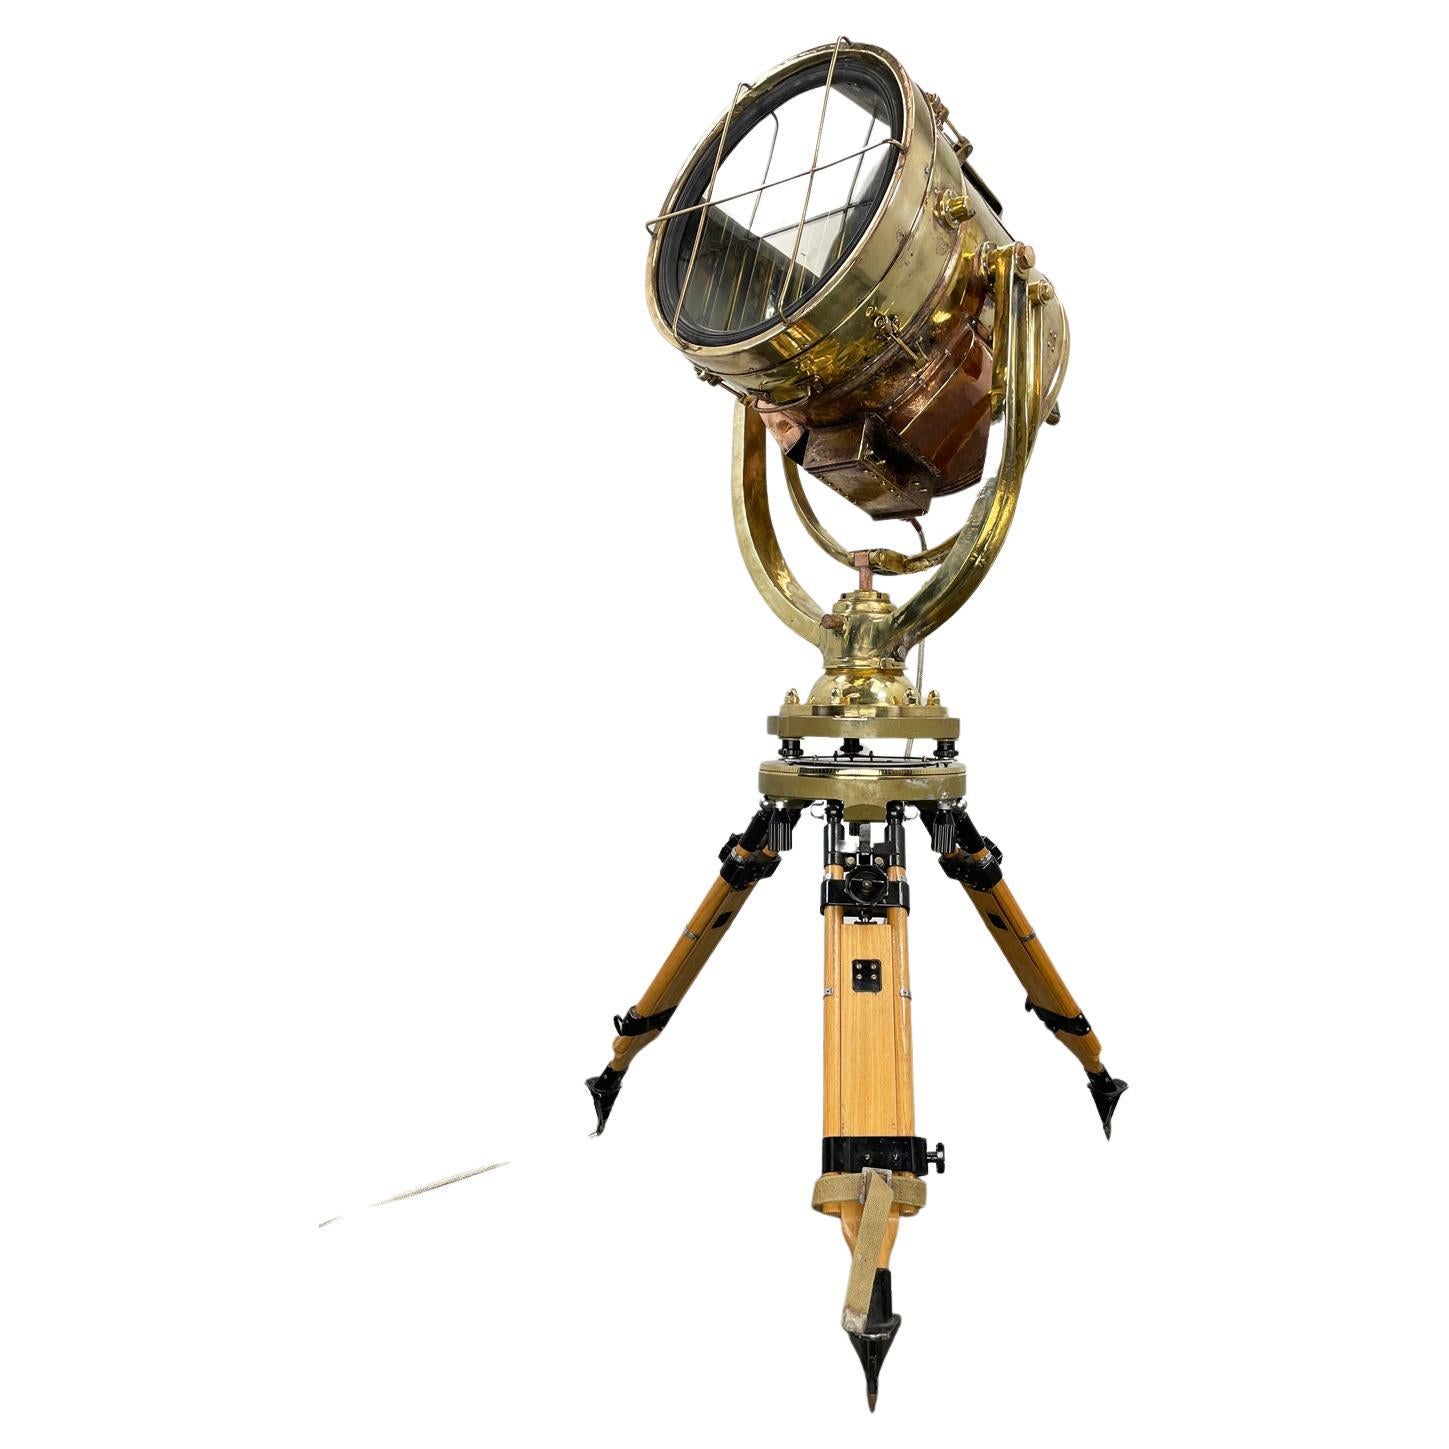 This is a Shonan Kosakusho daylight signalling lamp made in 1980 married with a military gyroscope tripod. 

Reclaimed from Mid-Century war ships, Shonan did manufacture these during World War 2 until the firestorm on Japan ceased production. The